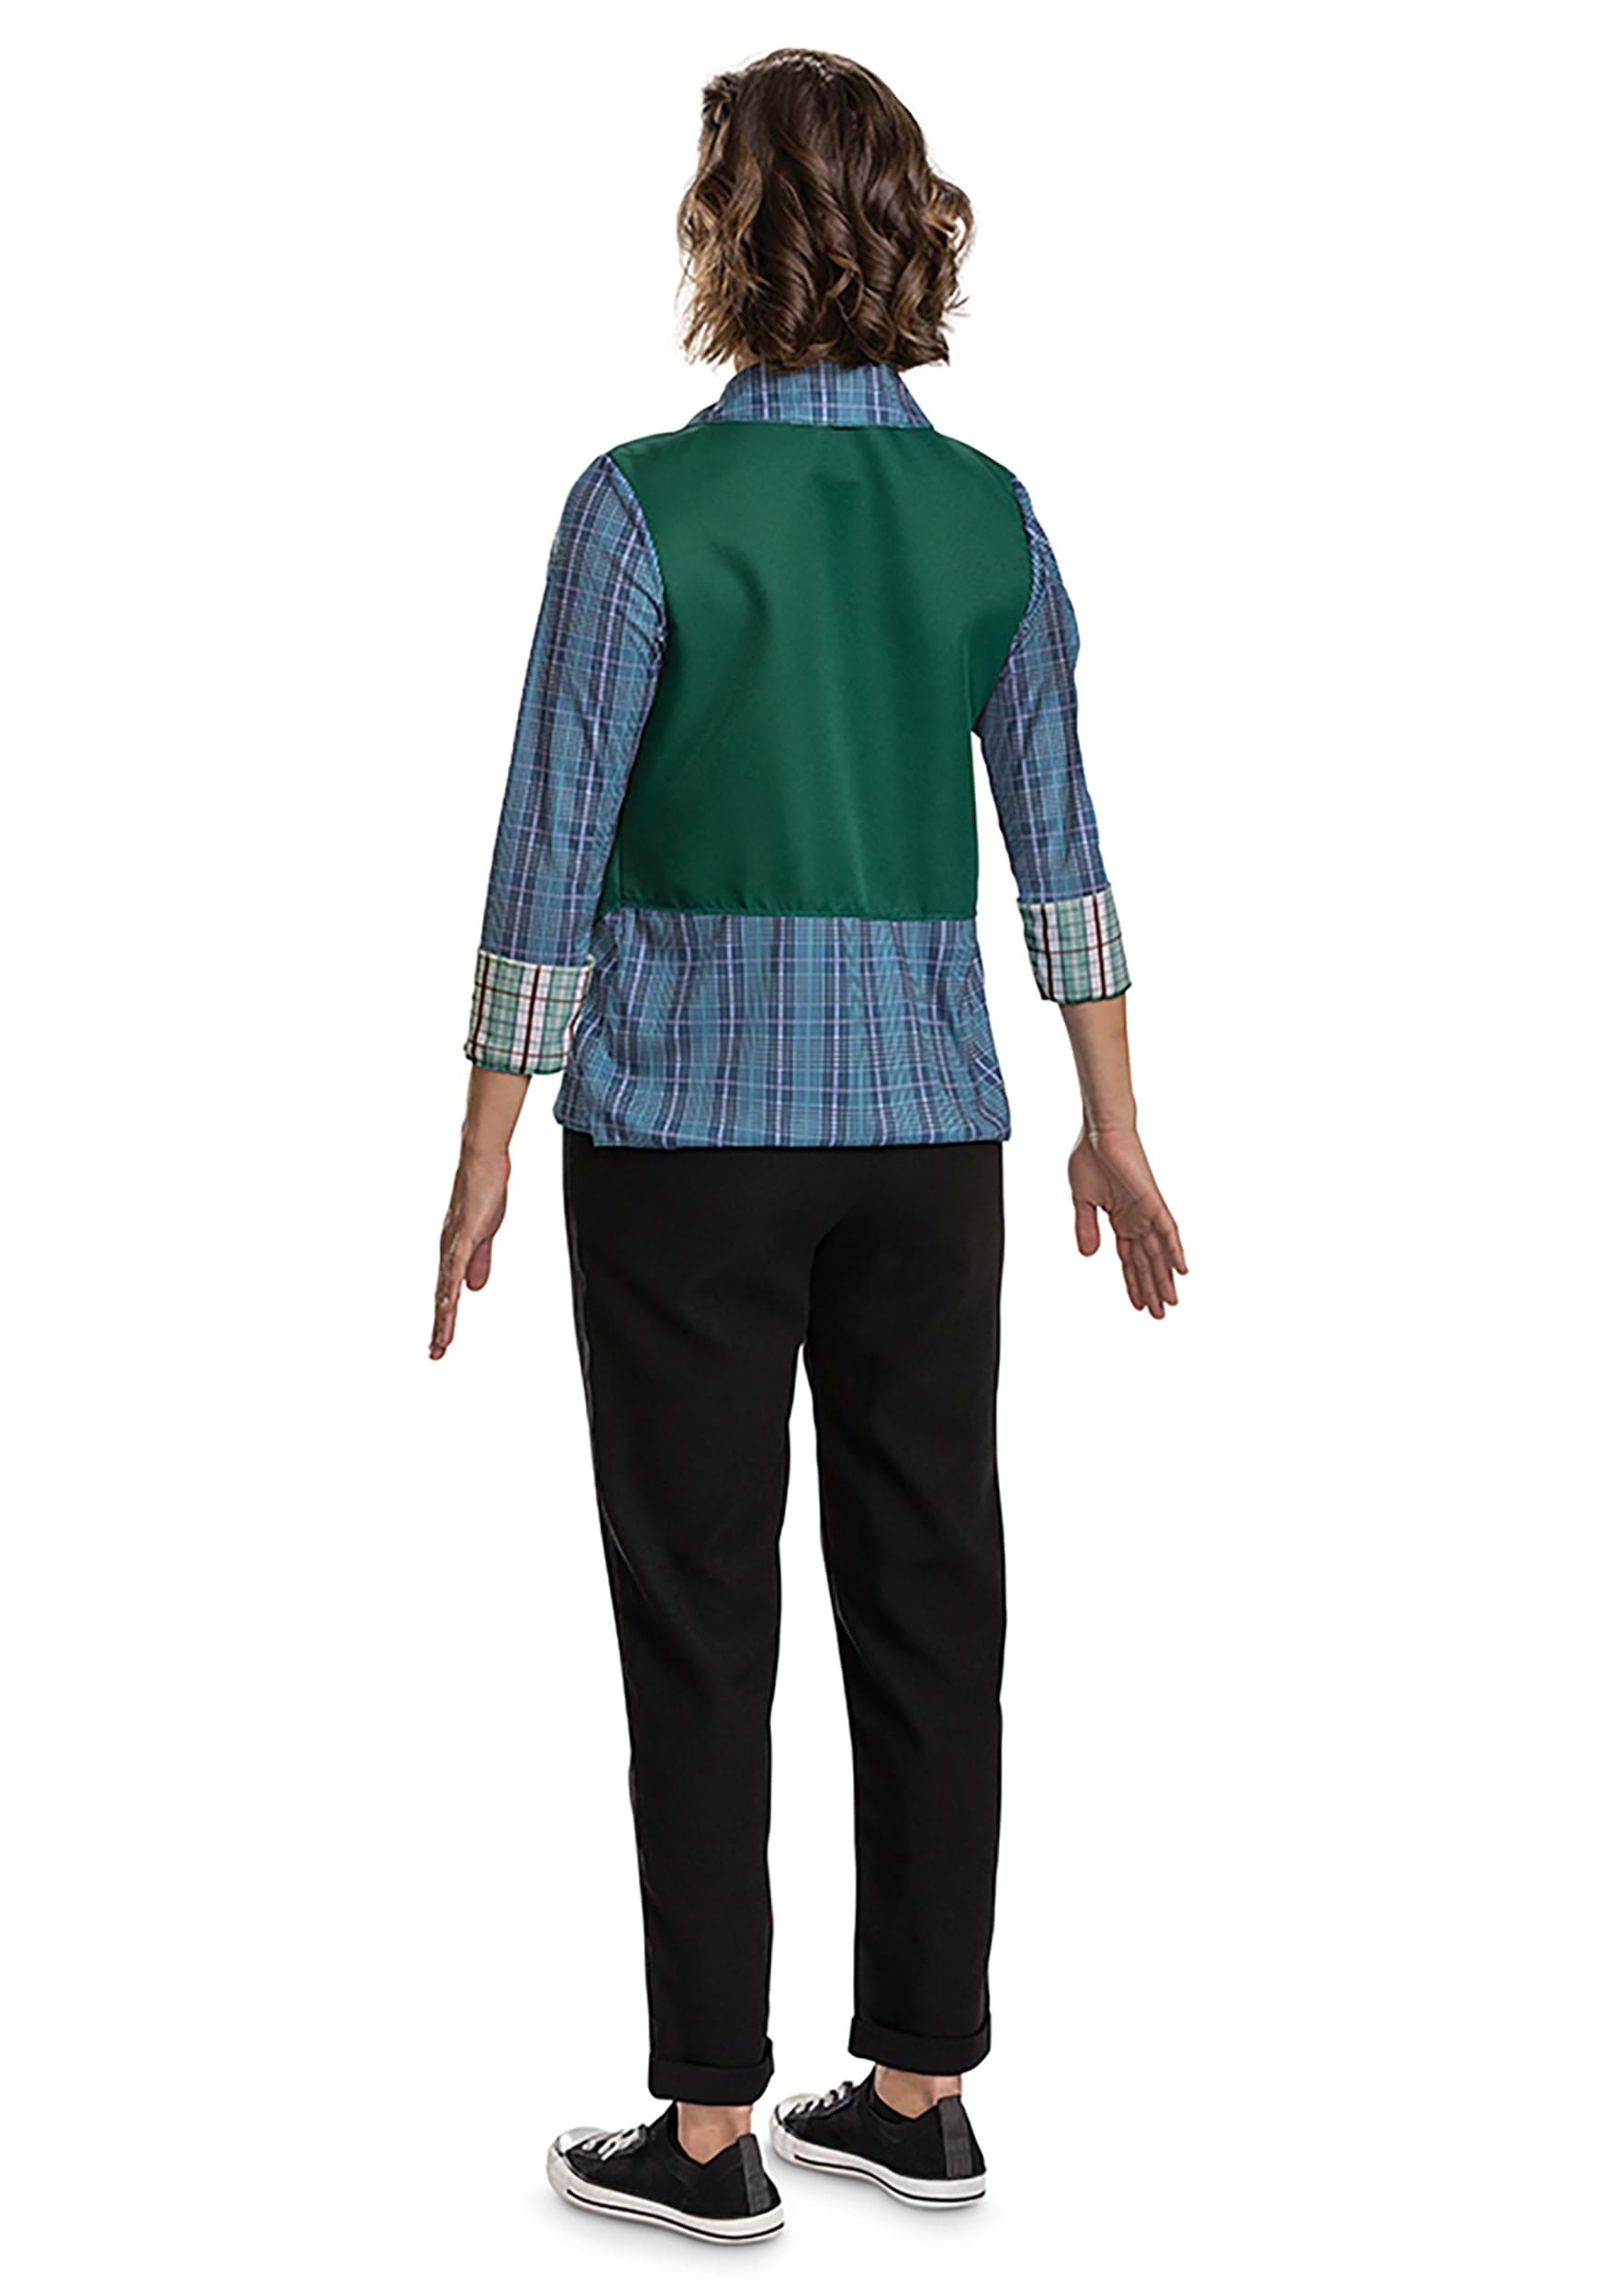 Adult Stranger Things Deluxe Video Stop Robin S4 Costume